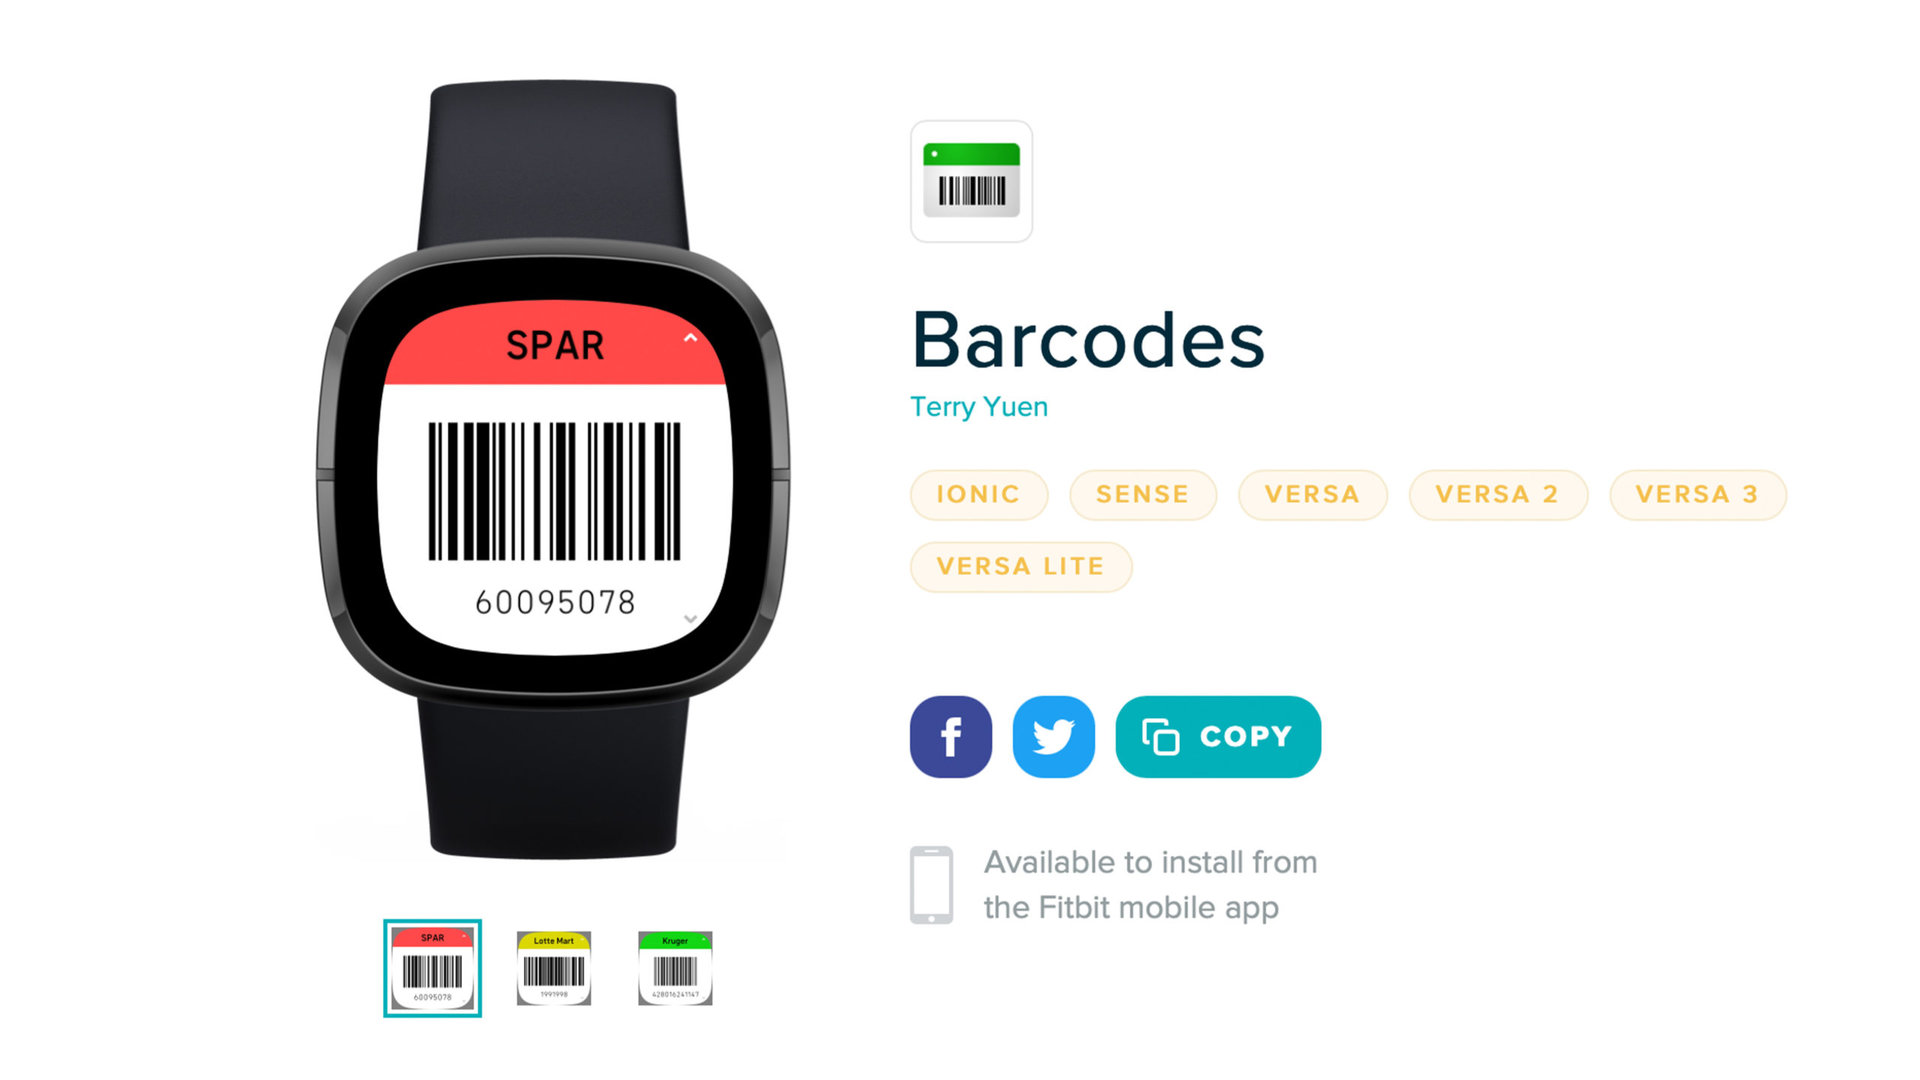 Information about the Barcodes app for Fitbit.